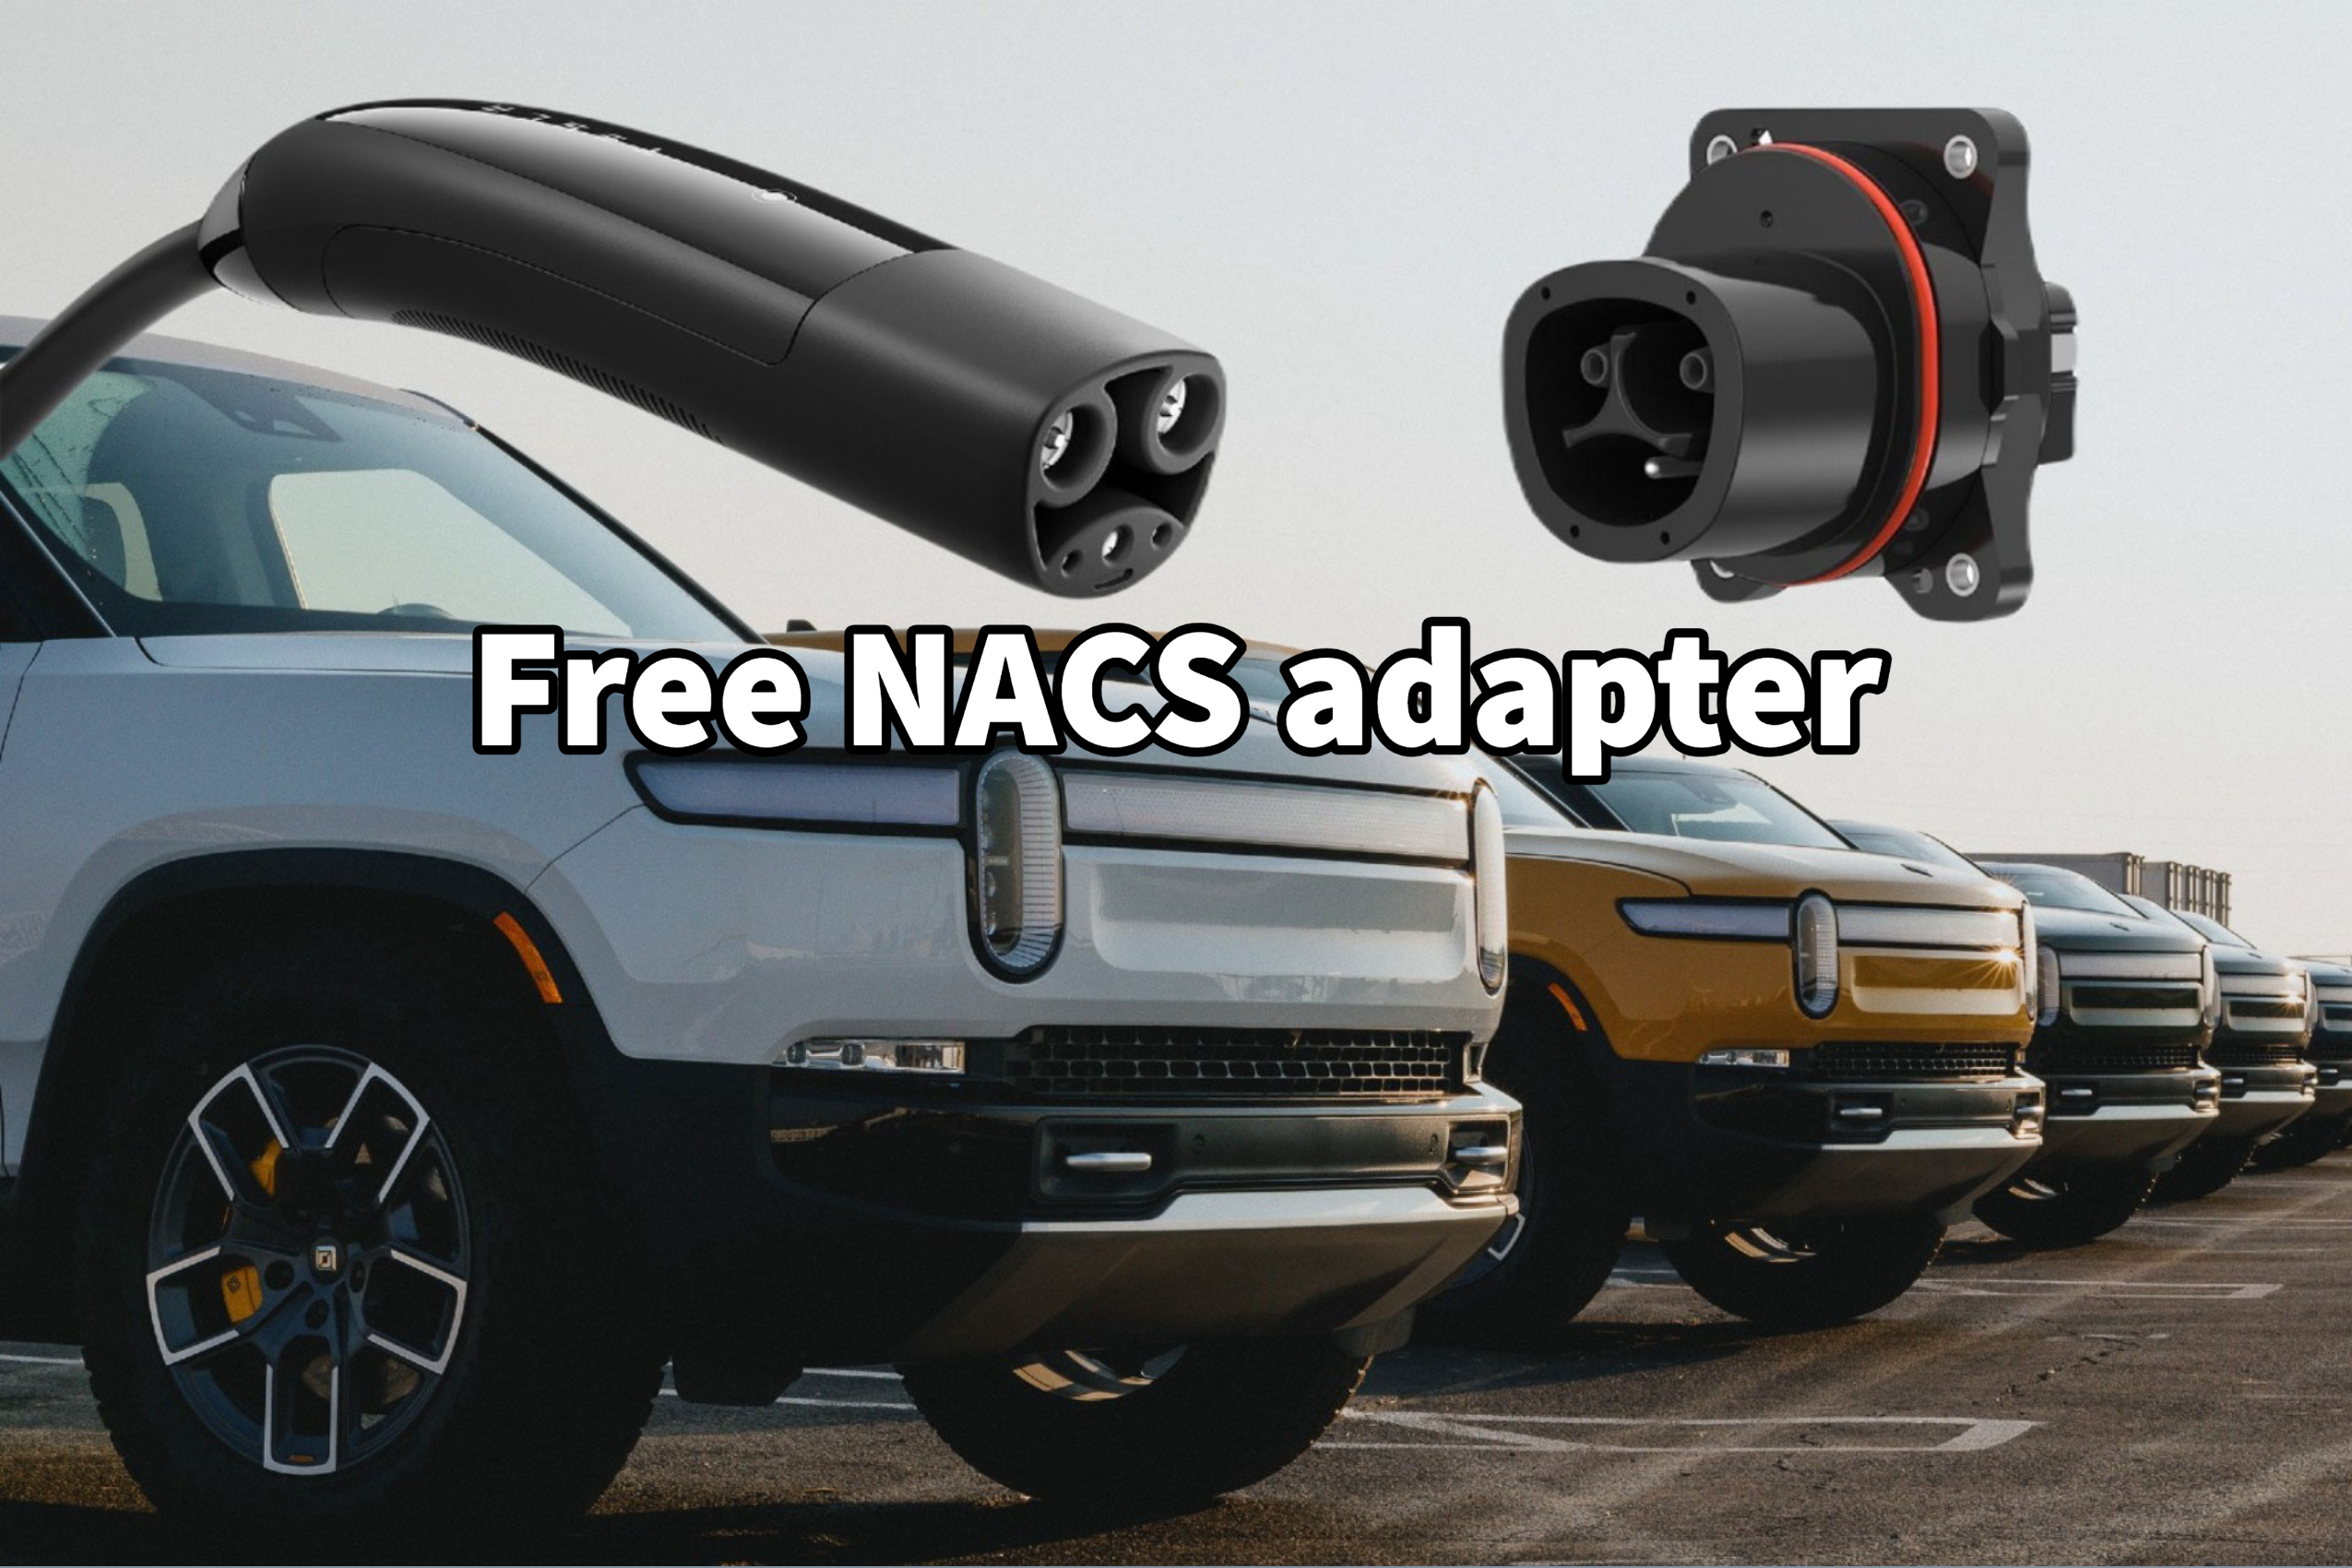 https://s1.cdn.autoevolution.com/images/news/rivian-will-offer-free-nacs-adapters-to-owners-with-ccs-vehicles-216853_1.jpg